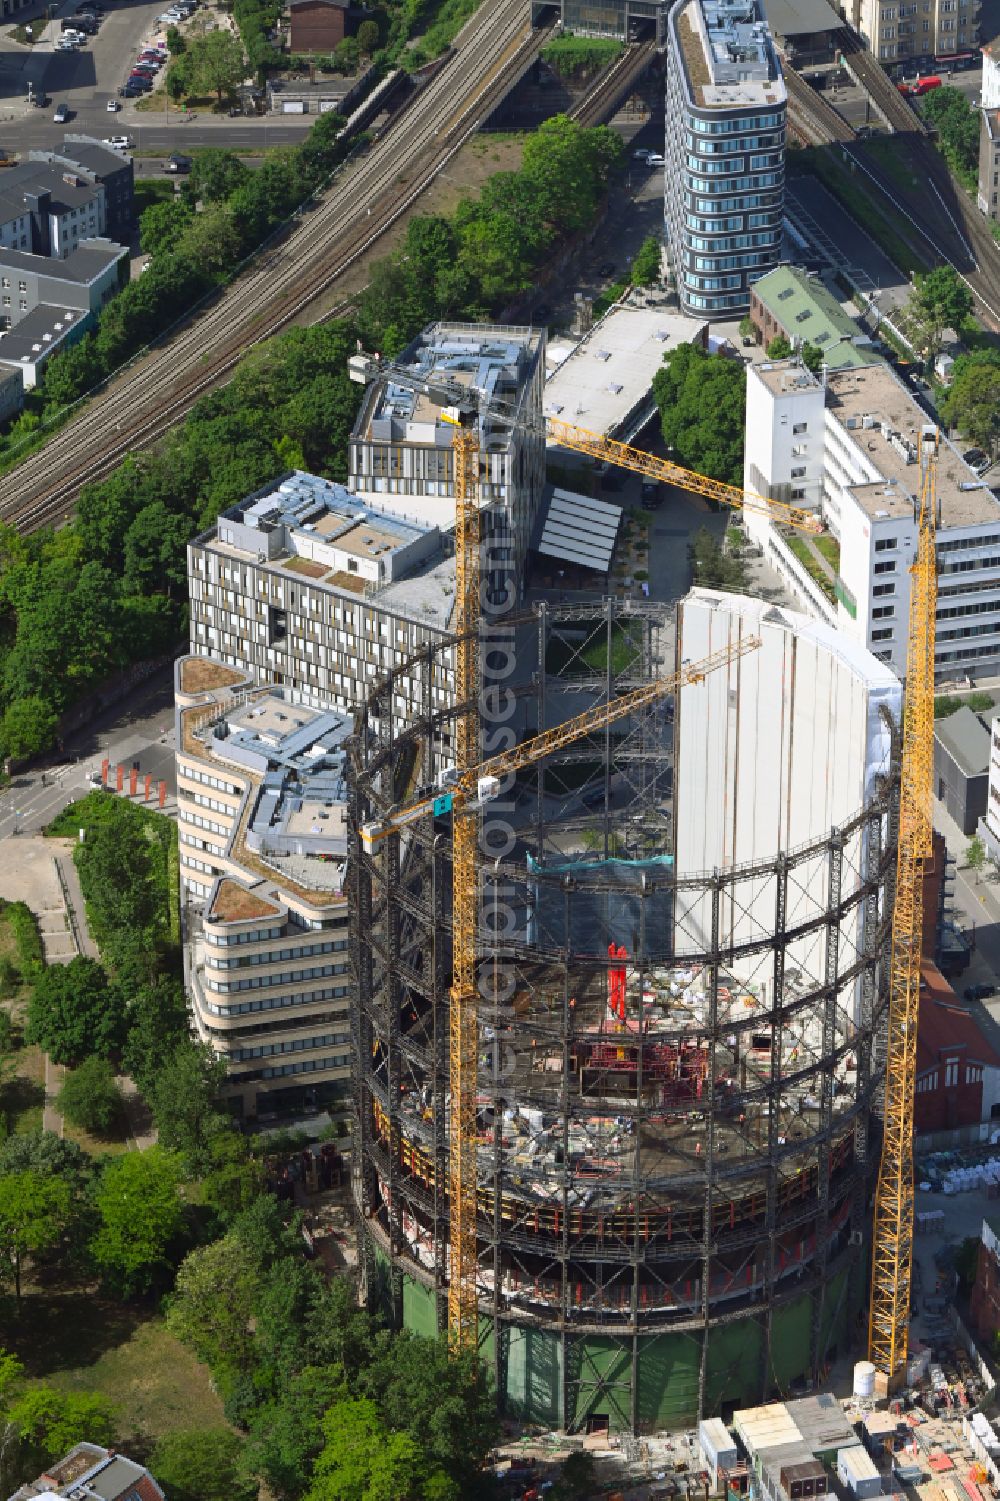 Berlin from above - Gasometer high storage tank during conversion and renovation in the district Schoeneberg in Berlin, Germany